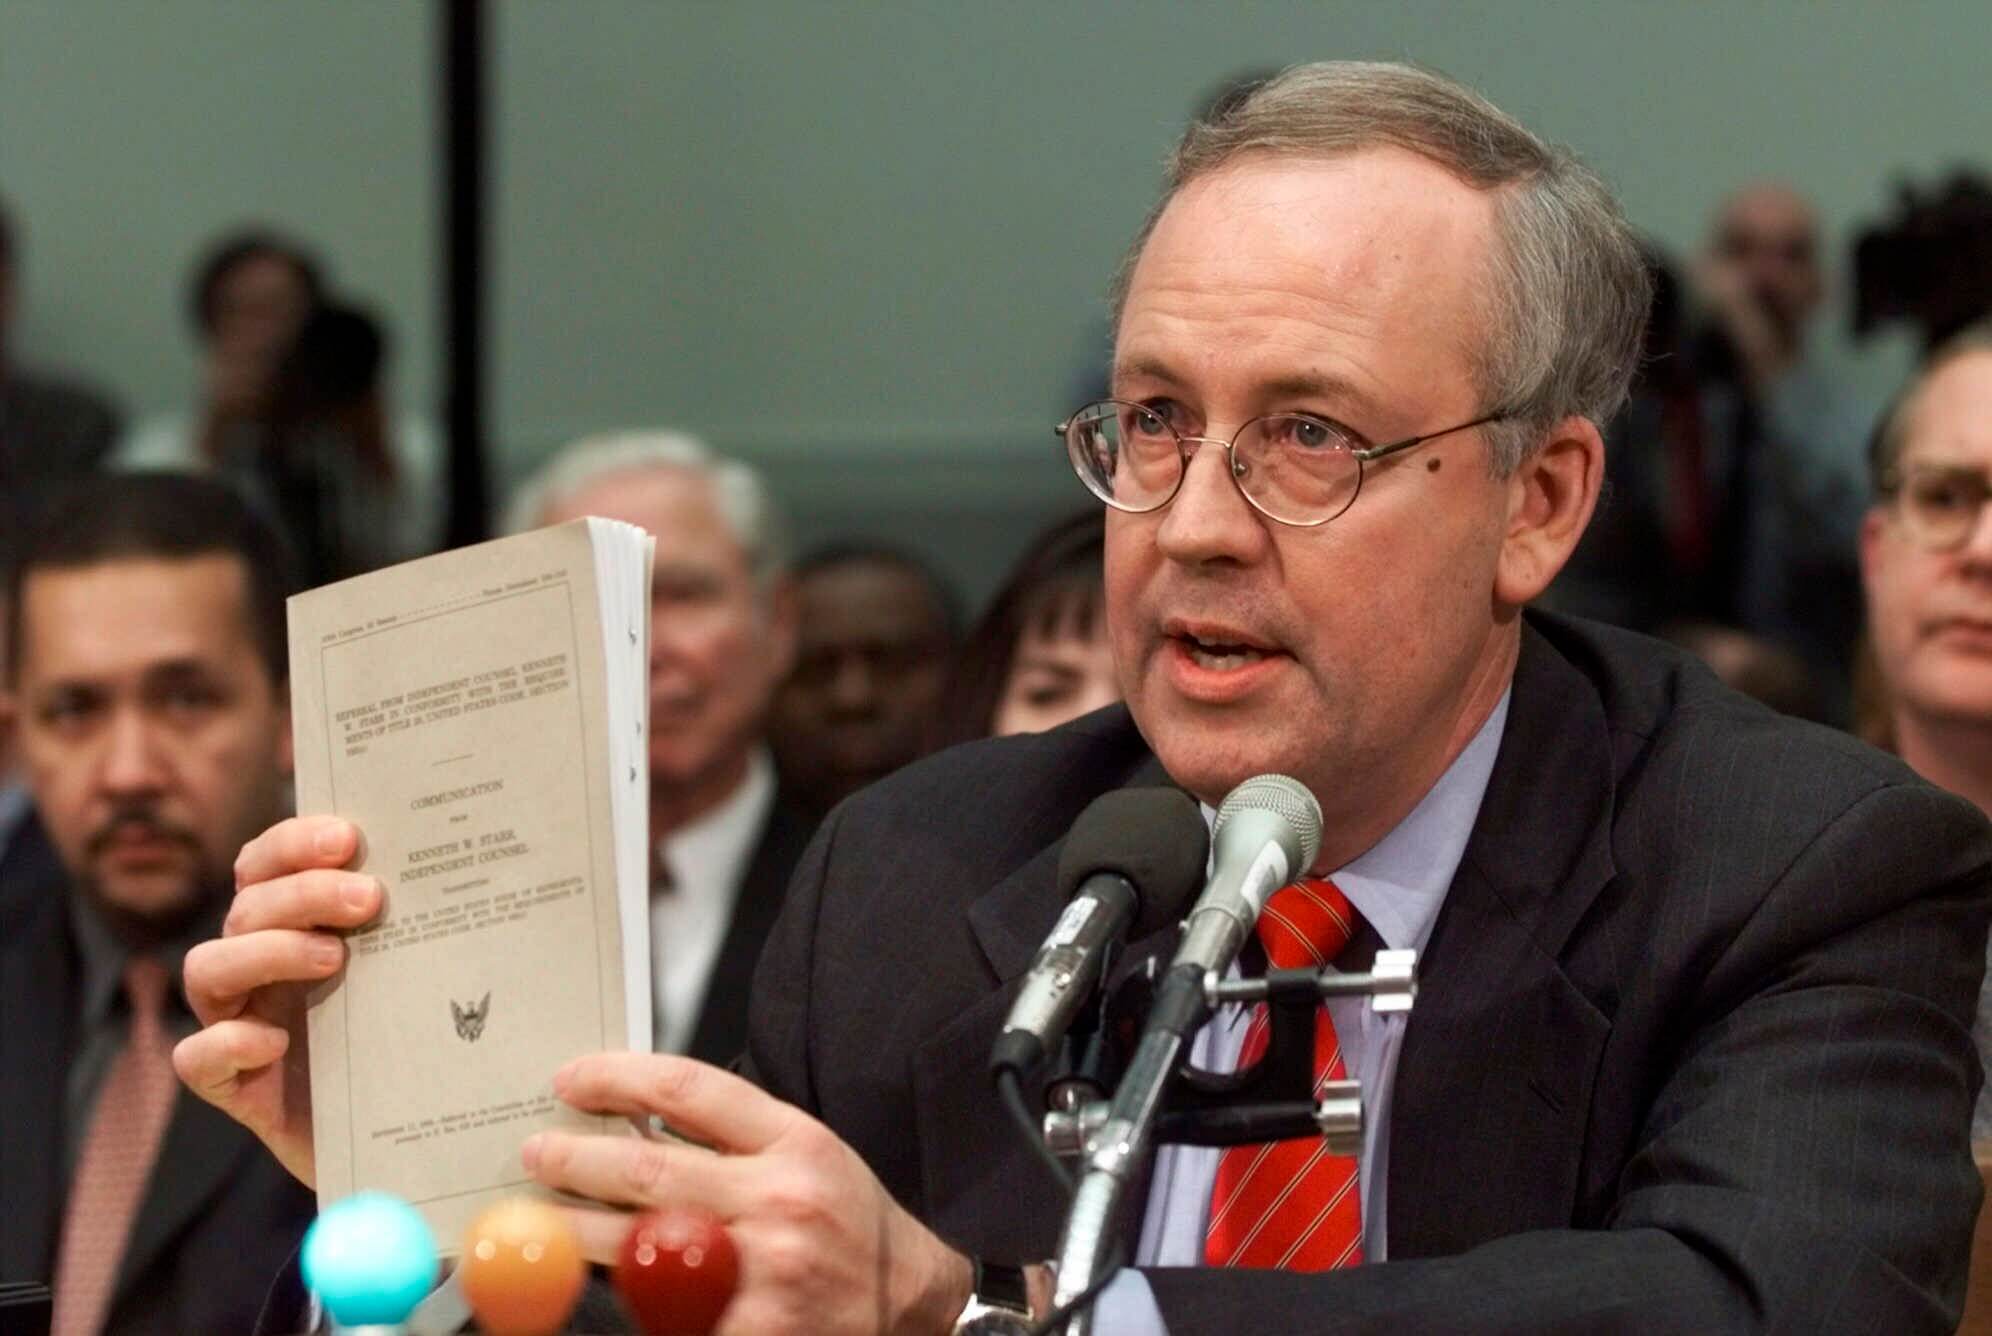 FILE - Independent Counsel Kenneth Starr holds a copy of his report while testifying on Capitol Hill Thursday Nov. 19, 1998, before the House Judiciary Committee's impeachment hearing. Starr, whose criminal investigation of Bill Clinton led to the president’s impeachment, died Sept. 13, 2022. He was 76. (AP Photo/Doug Mills, File)